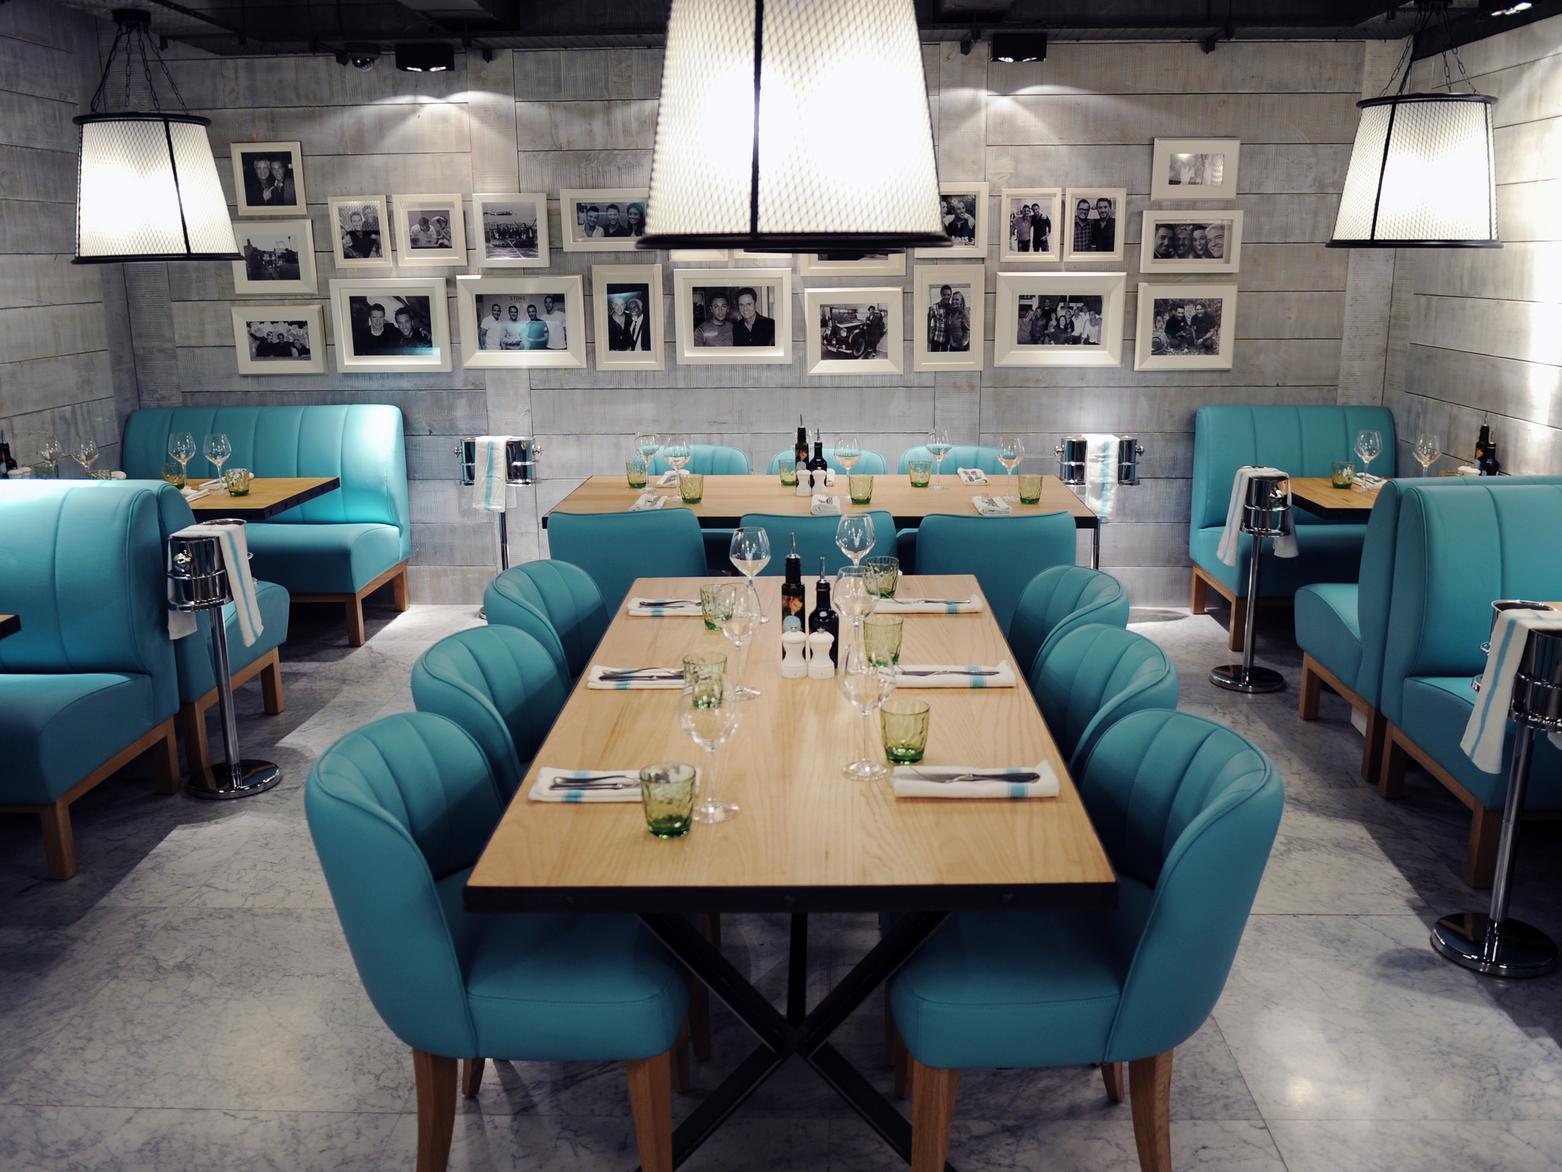 Another restaurant in the Club Individual offer - members can get get 50% of their food spend back as points when they eat at Gino D'Acampo's restaurant on Park Row.